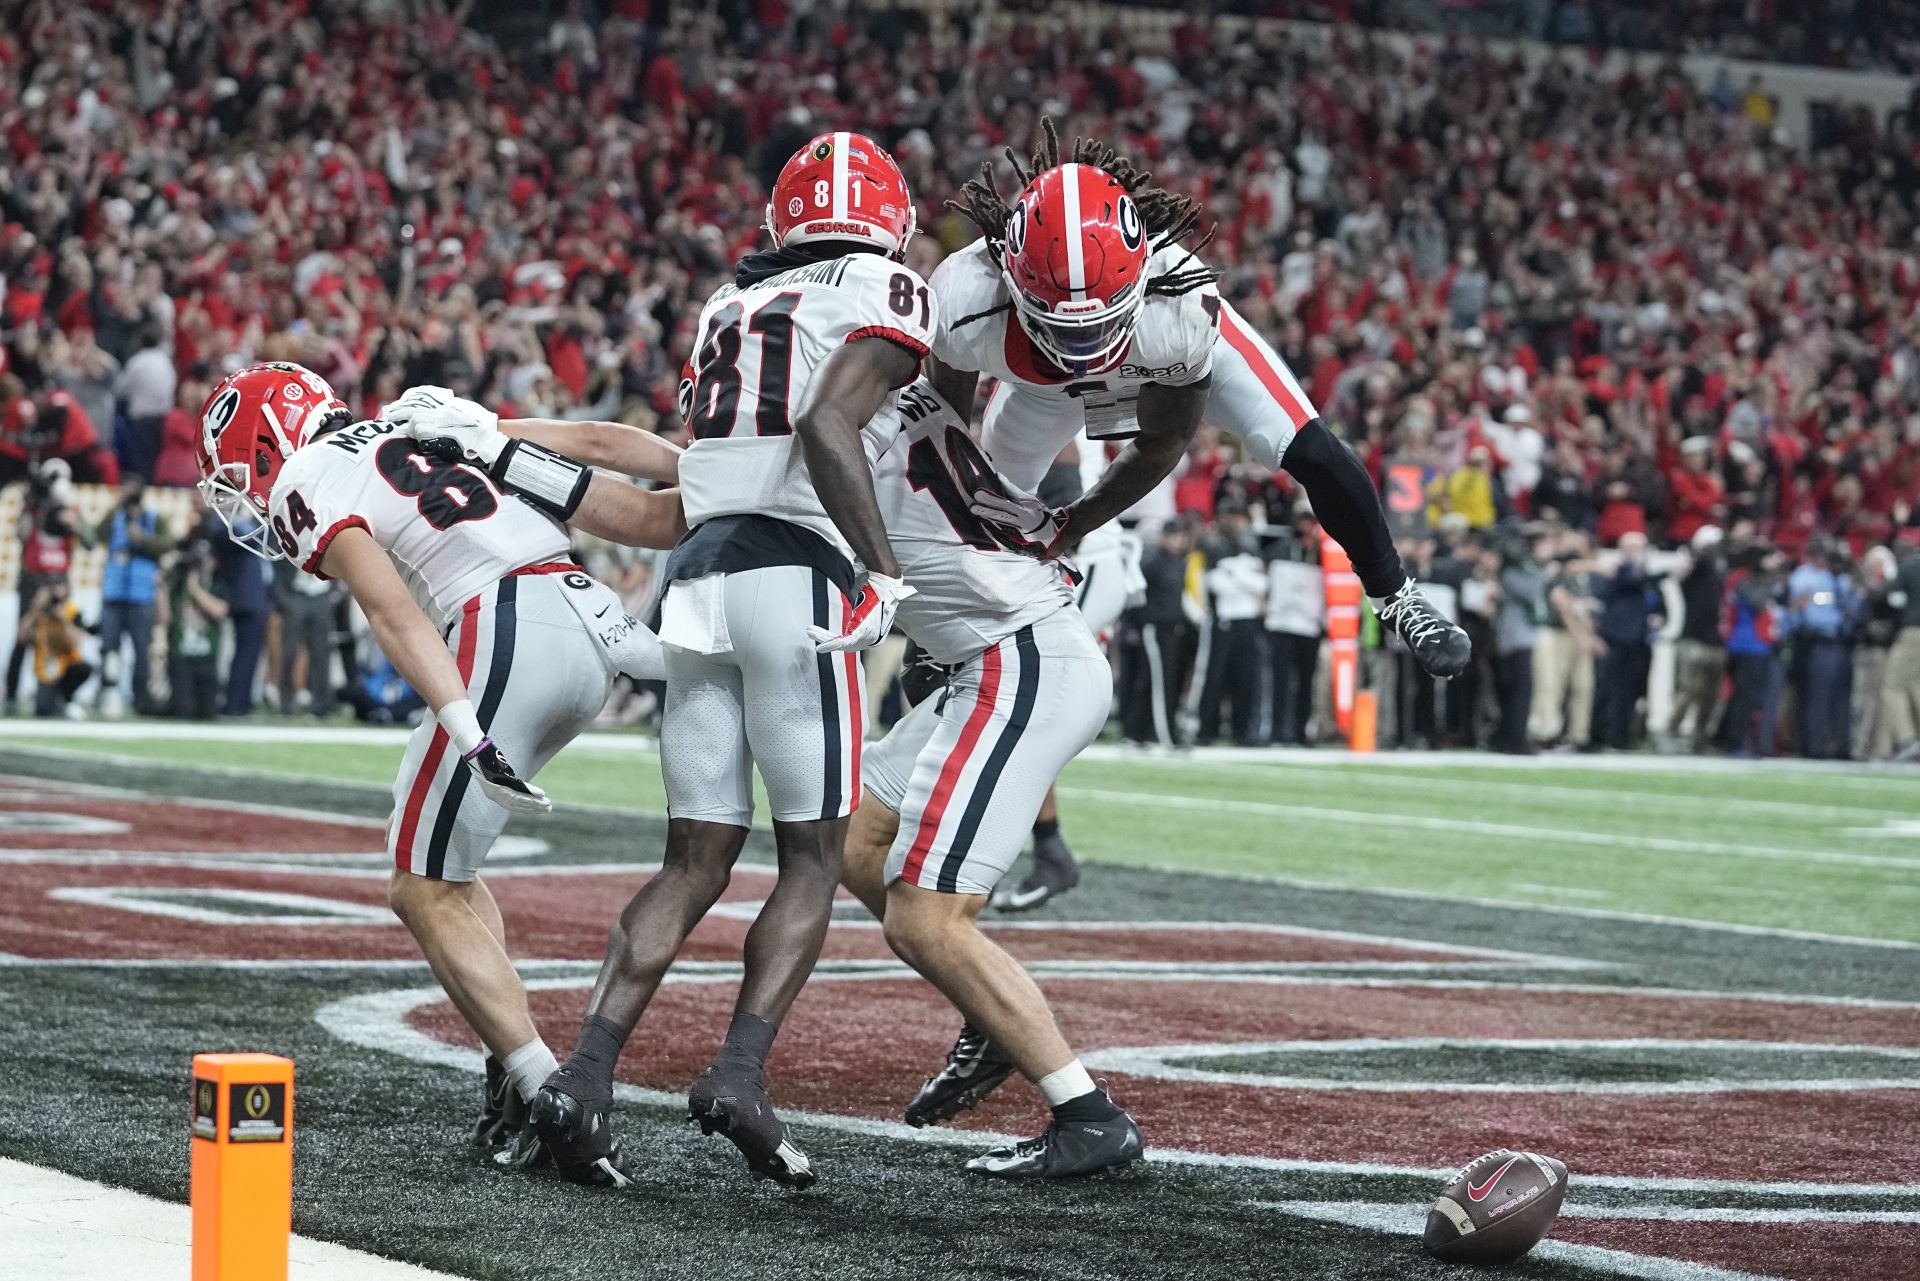 Georgia's Brock Bowers is congratulated after scoring a touchdown during the second half of the College Football Playoff championship football game against Alabama Monday, Jan. 10, 2022, in Indianapolis.